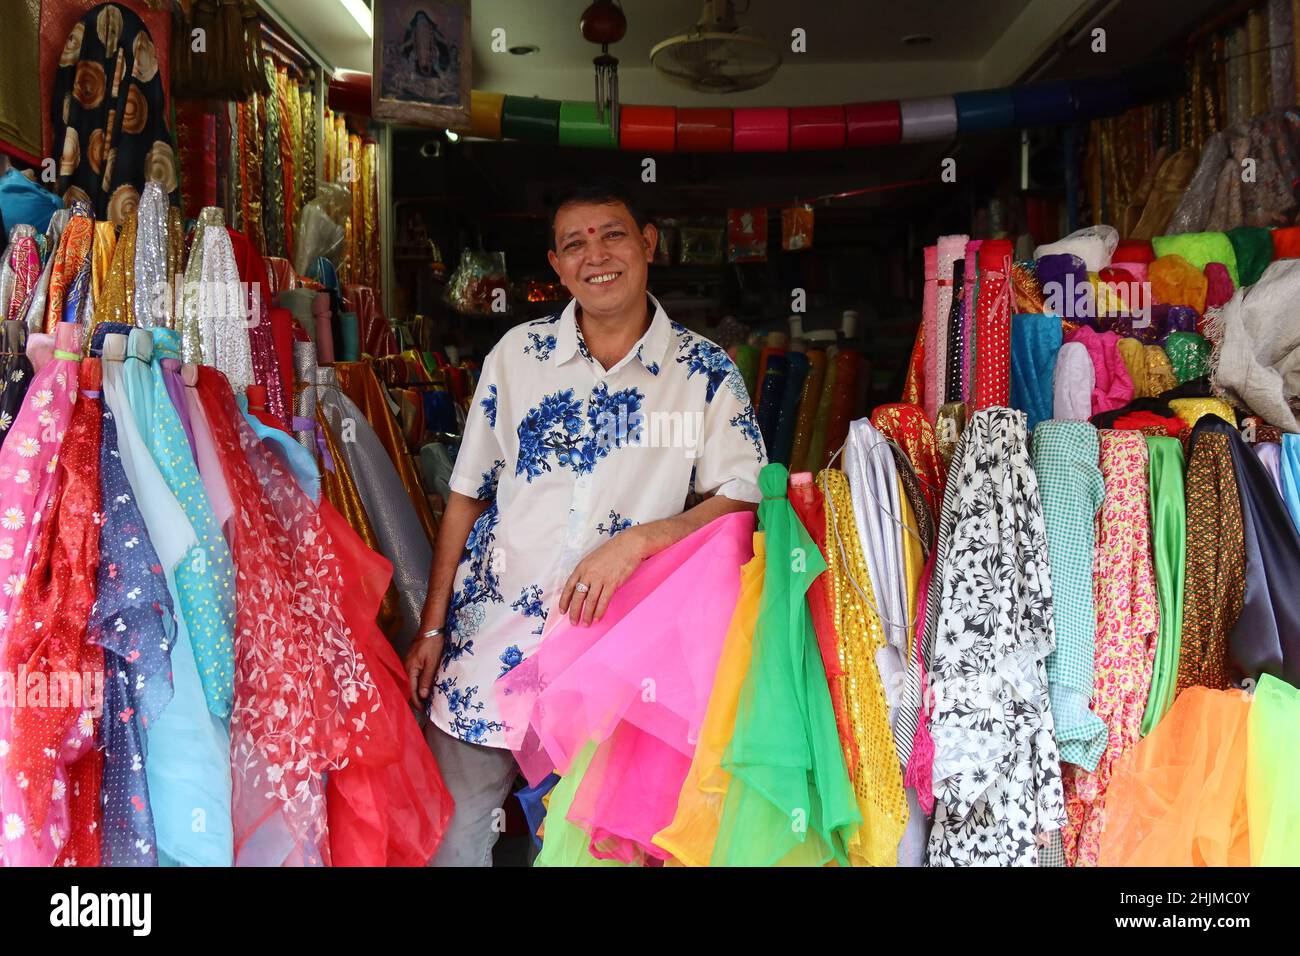 Smiling Textile Seller in one of the many textile stores, Little India, Chinatown, Phahurat, Bangkok, Thailand Stock Photo